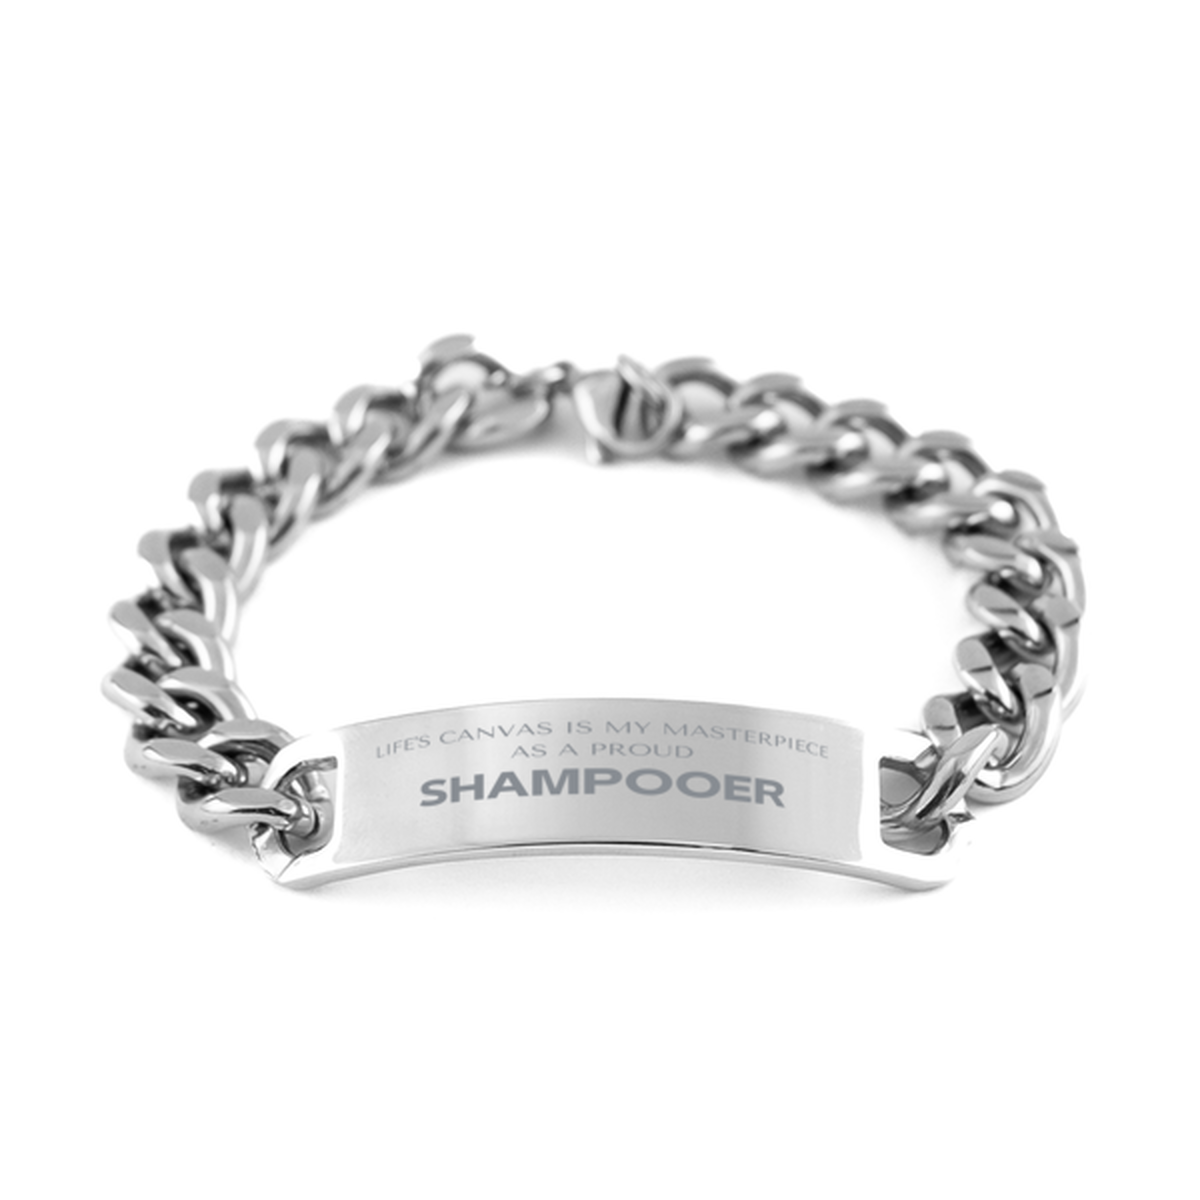 Proud Shampooer Gifts, Life's canvas is my masterpiece, Epic Birthday Christmas Unique Cuban Chain Stainless Steel Bracelet For Shampooer, Coworkers, Men, Women, Friends